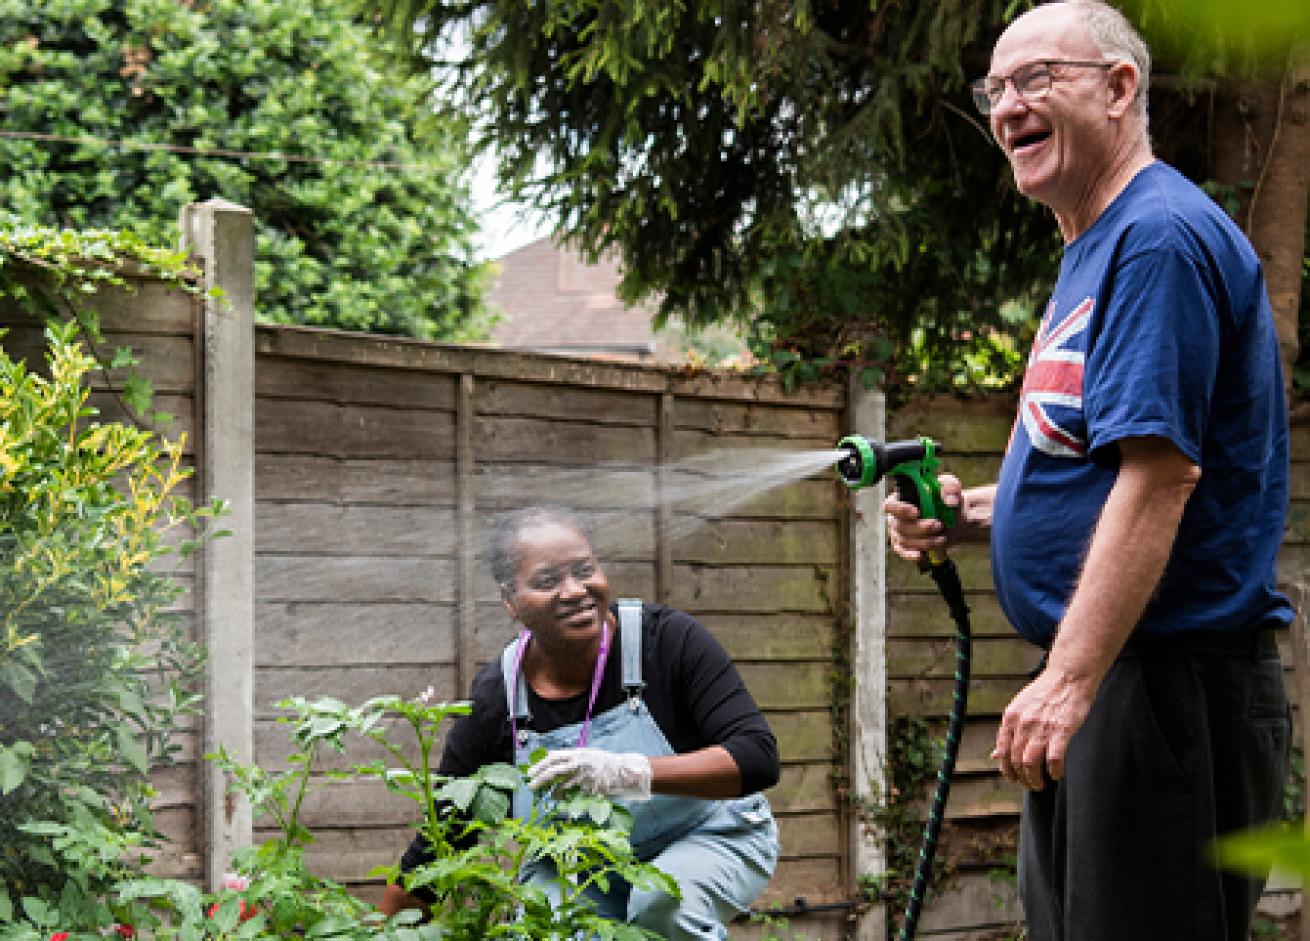 Sanctuary Supported Living staff and resident tending to the garden